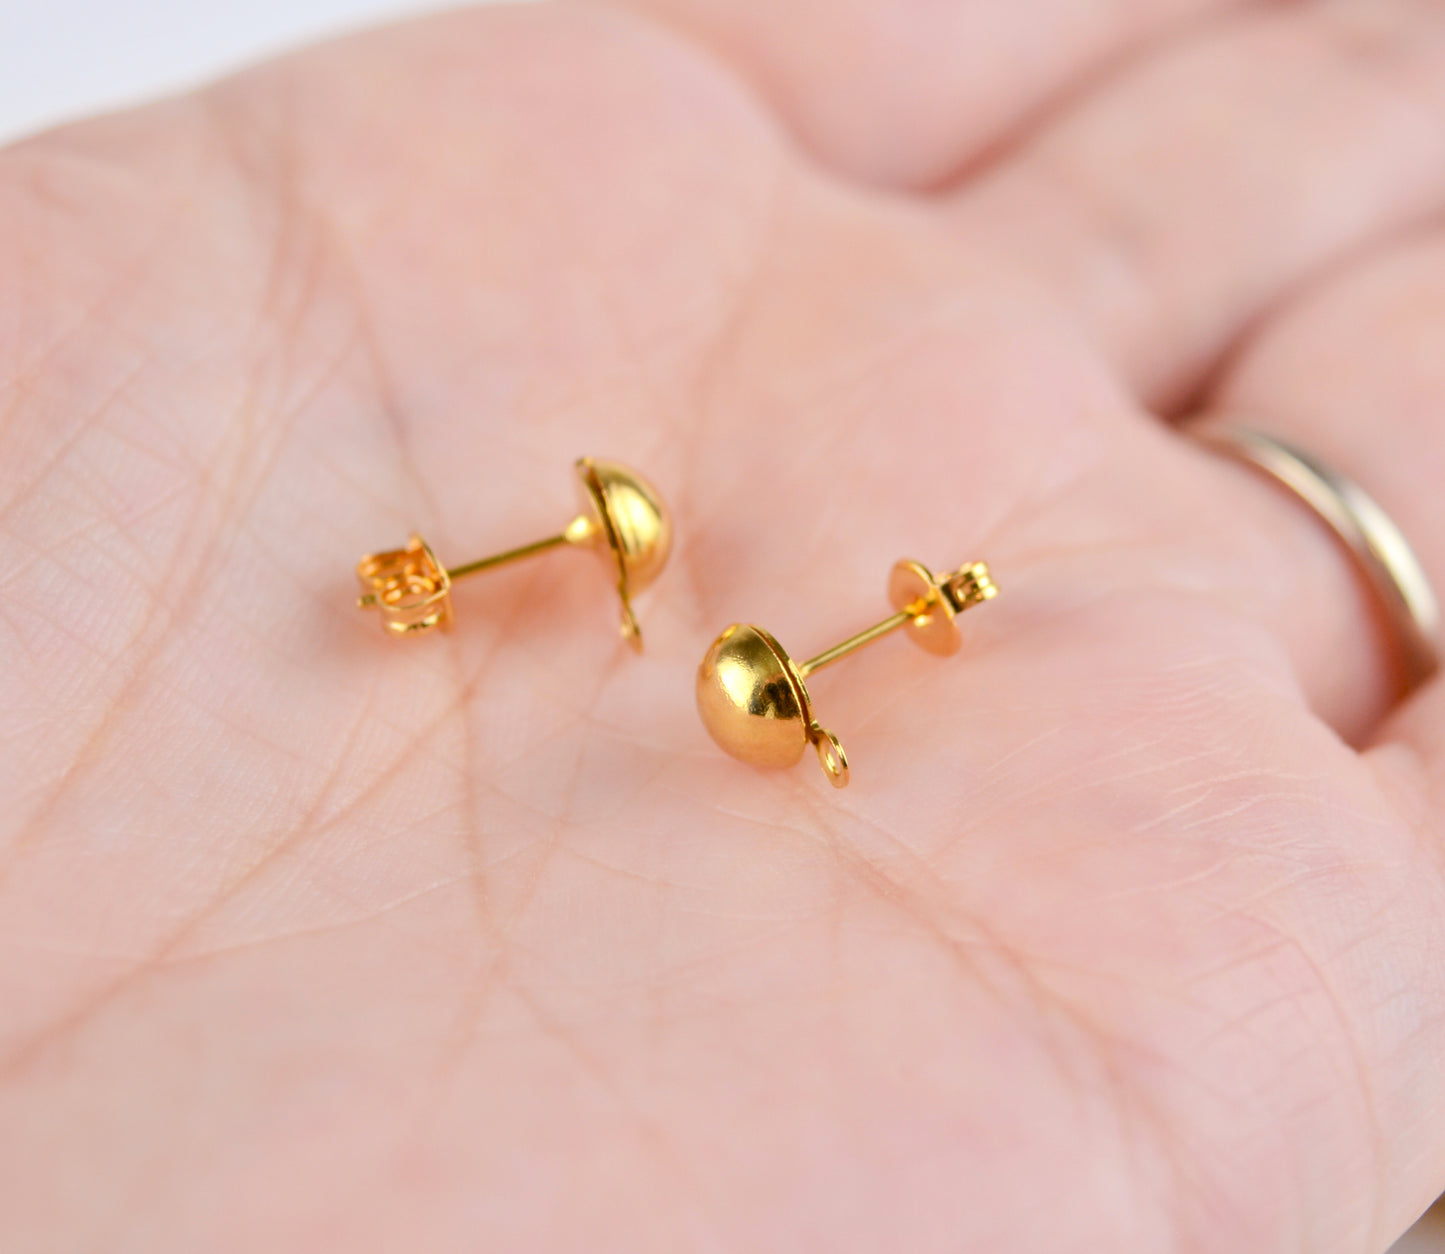 6mm Domed Earrings with Closed Loop, Choose Silver, Gold, Gunmetal, or Antiqued Gold Plated Brass